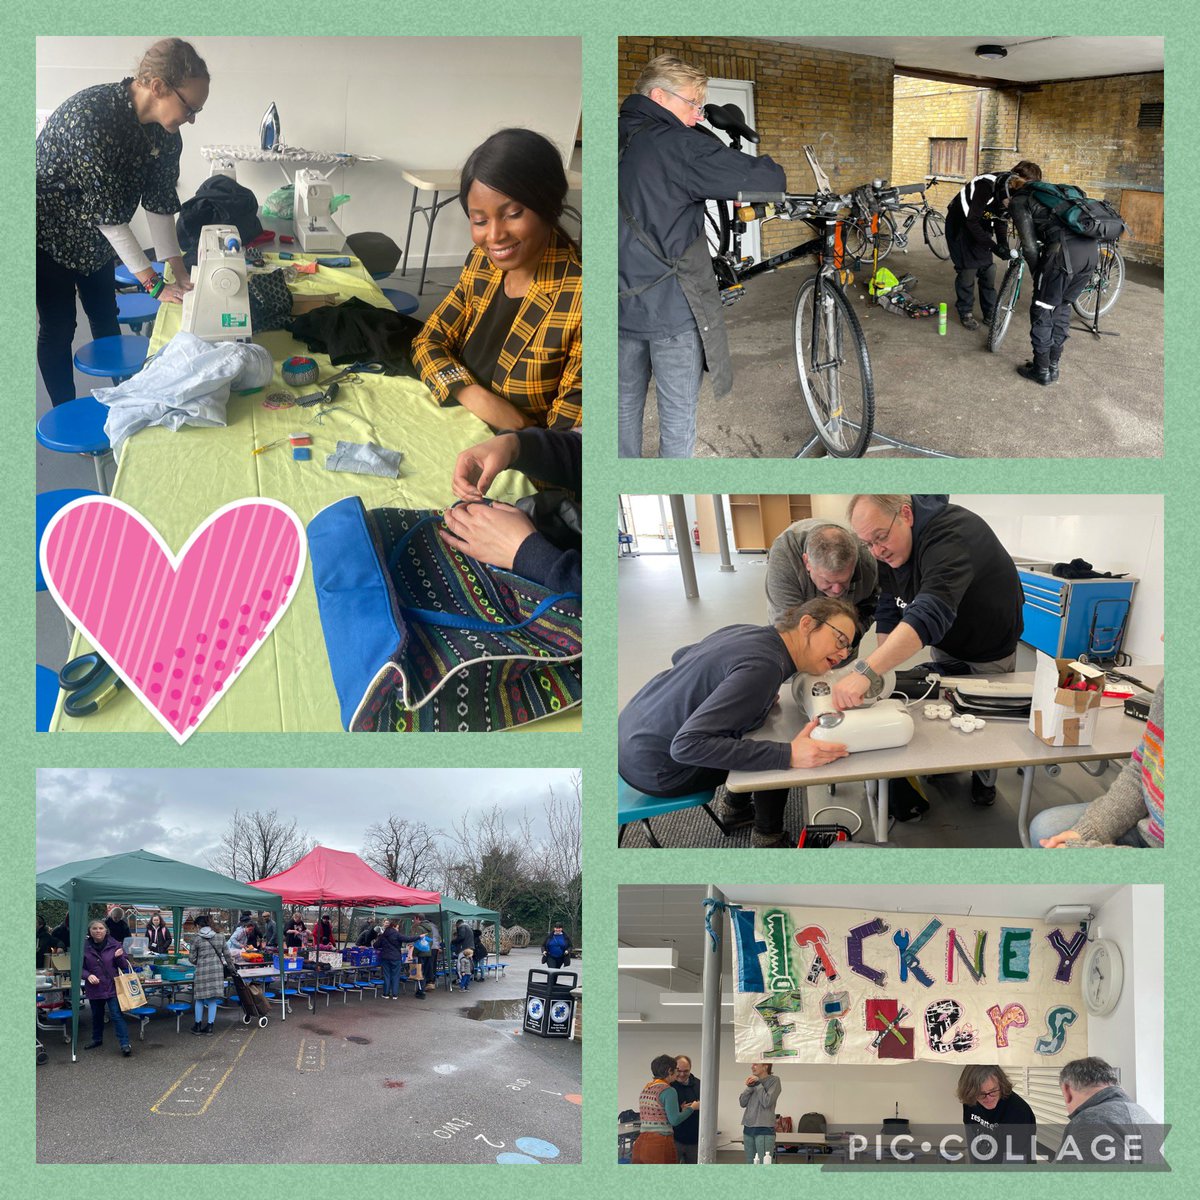 Celebrating #Sustainable living today as @greenerhackney #ZeroWasteHub comes to @woodberrydownN4 🌍 💚Bike checks 🚲 💚Electrical repairs 💡 💚Clothes mend 🧵 💚Swap Shop of pre loved everything! All free and here until 3pm - see you soon @NewWaveFed is delighted to host!💚